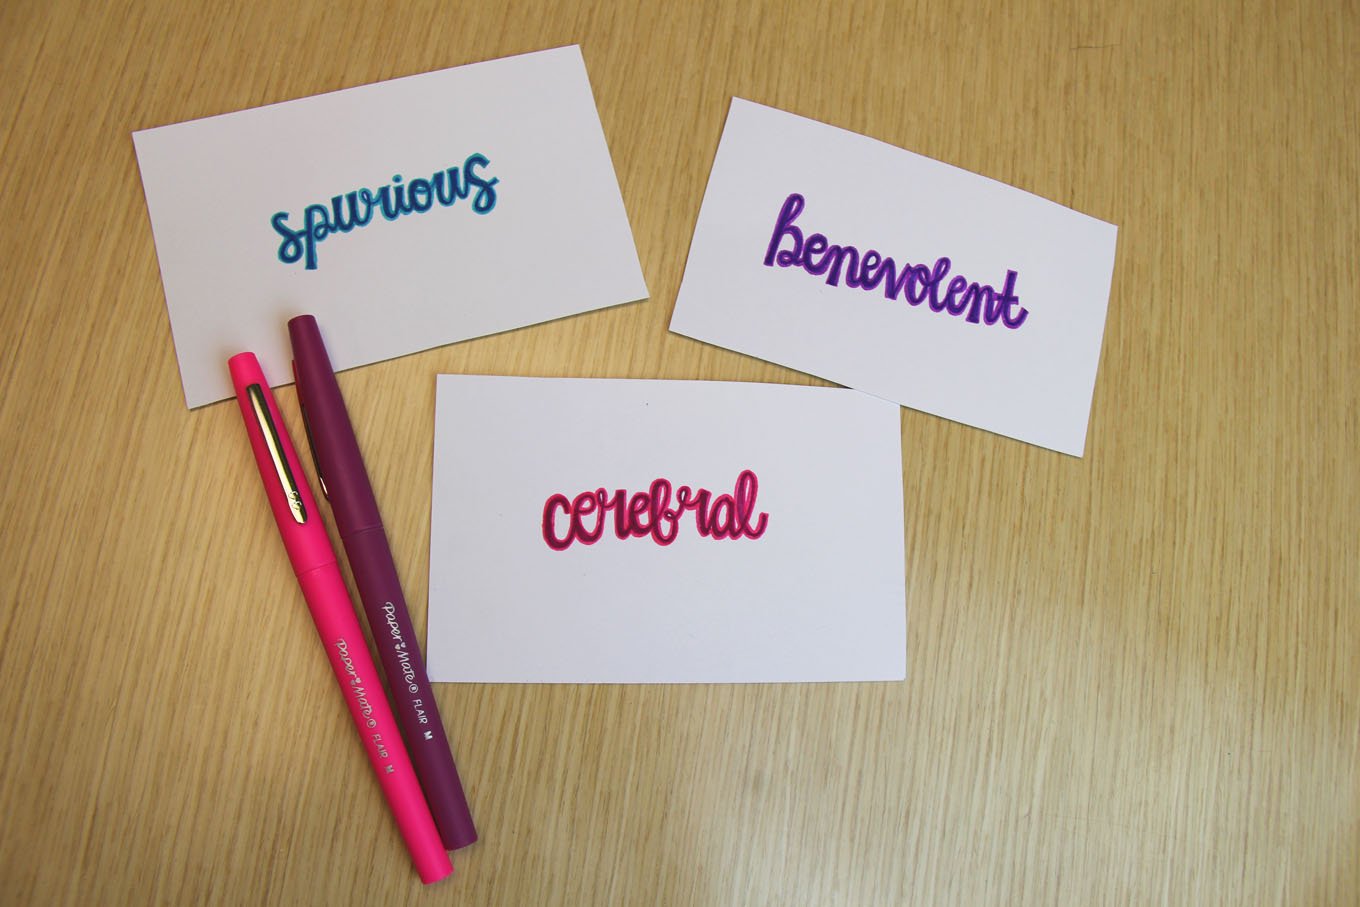 https://s7d9.scene7.com/is/image/NewellRubbermaid/three-colorful-handwritten-vocabulary-cards-with-flair-pens?fmt=jpeg